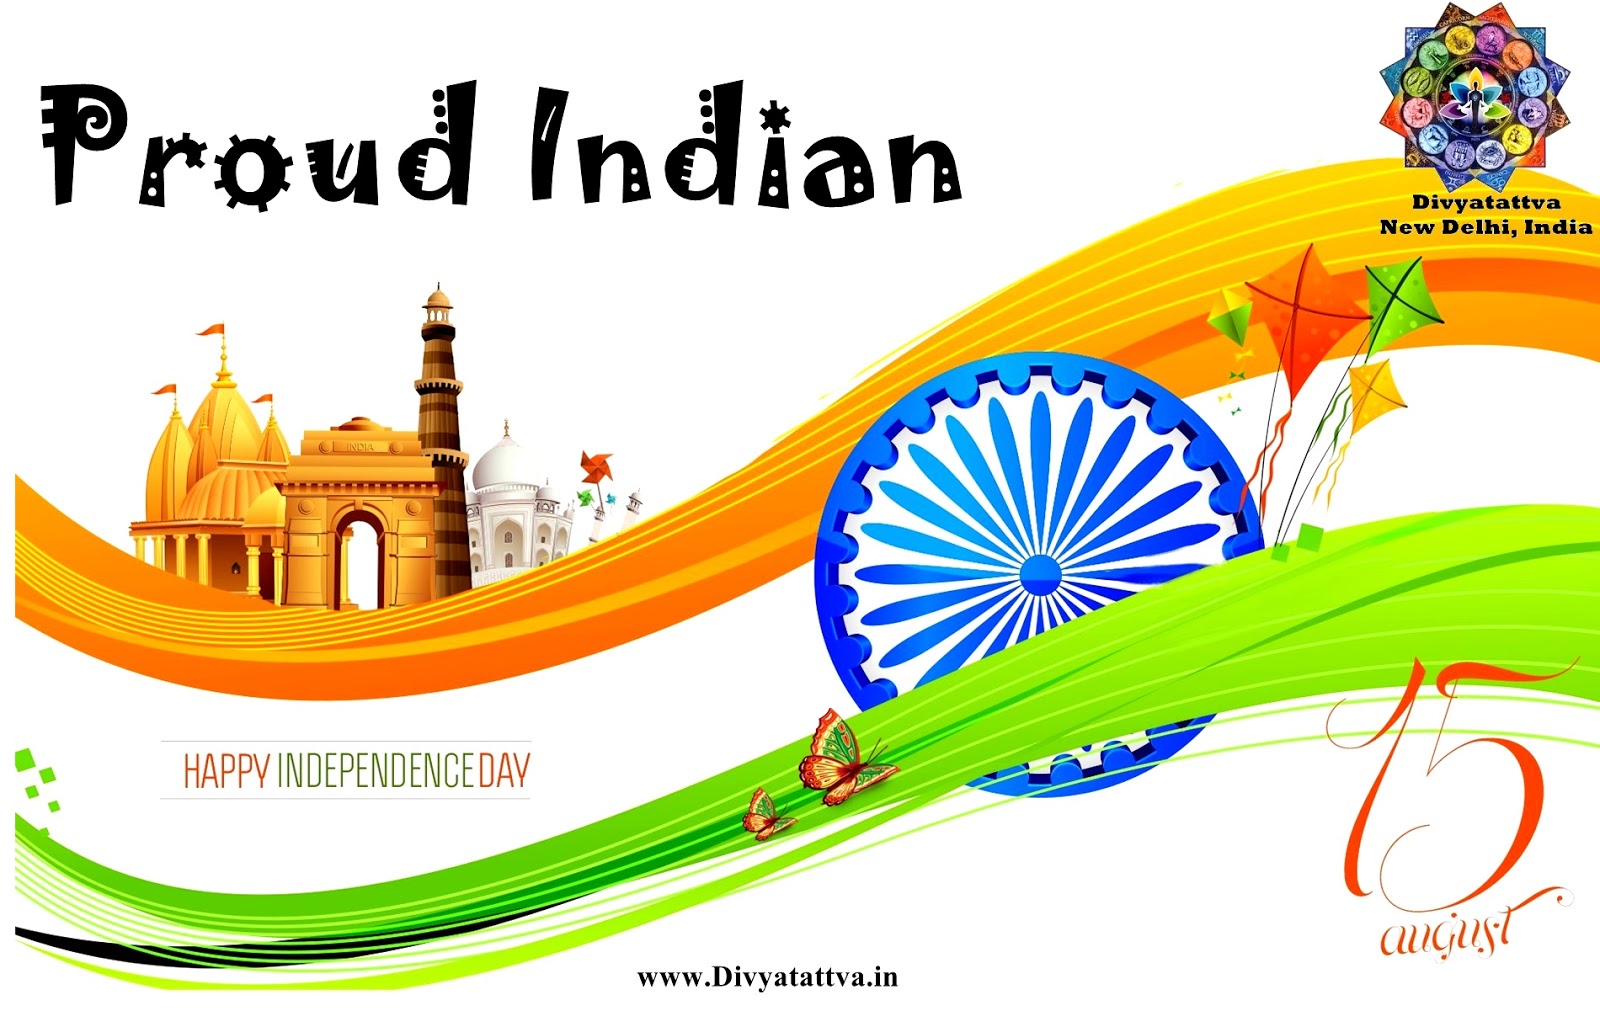 Happy 15th August India Independence Day wallpaper Full Size Image, Picture, Photo